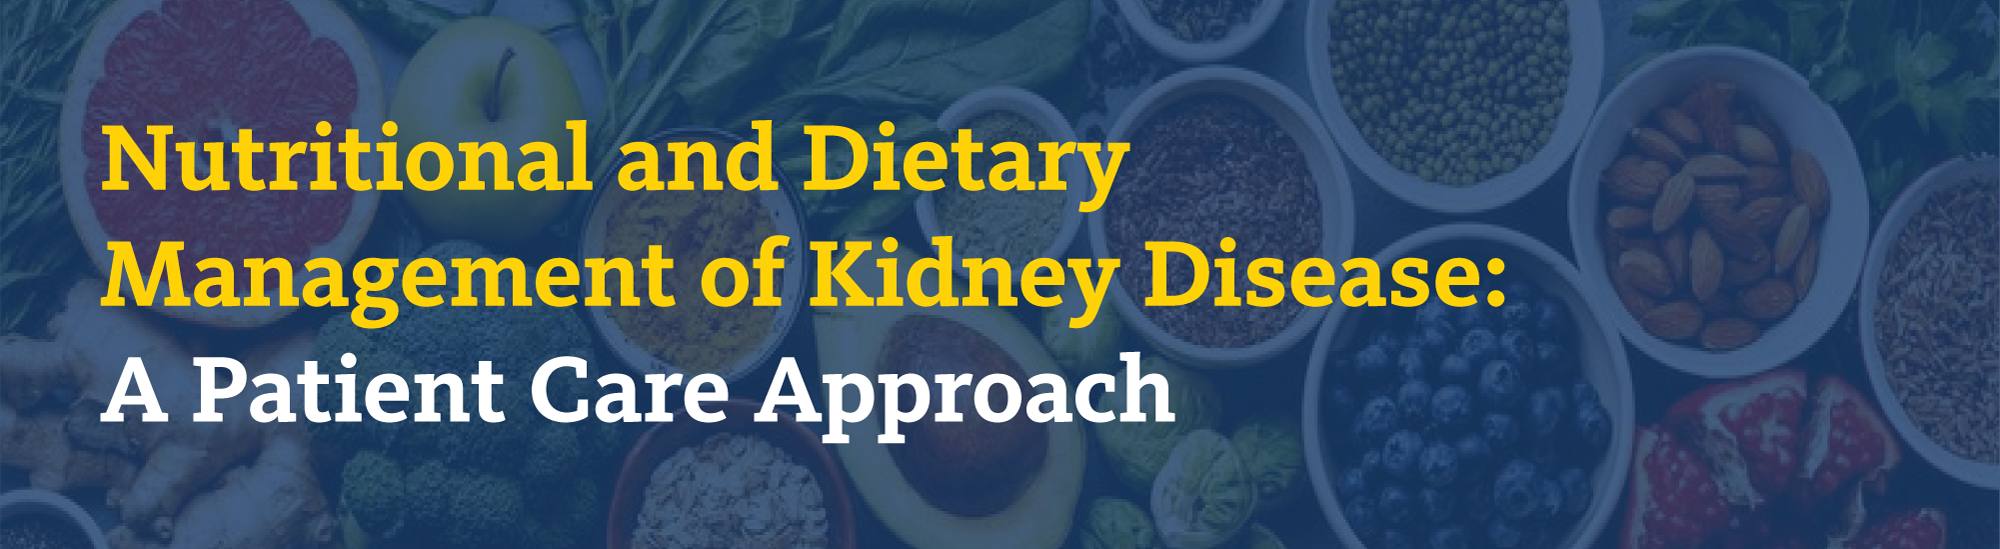 Nutritional and Dietary Management of Kidney Disease: A Patient Care Approach